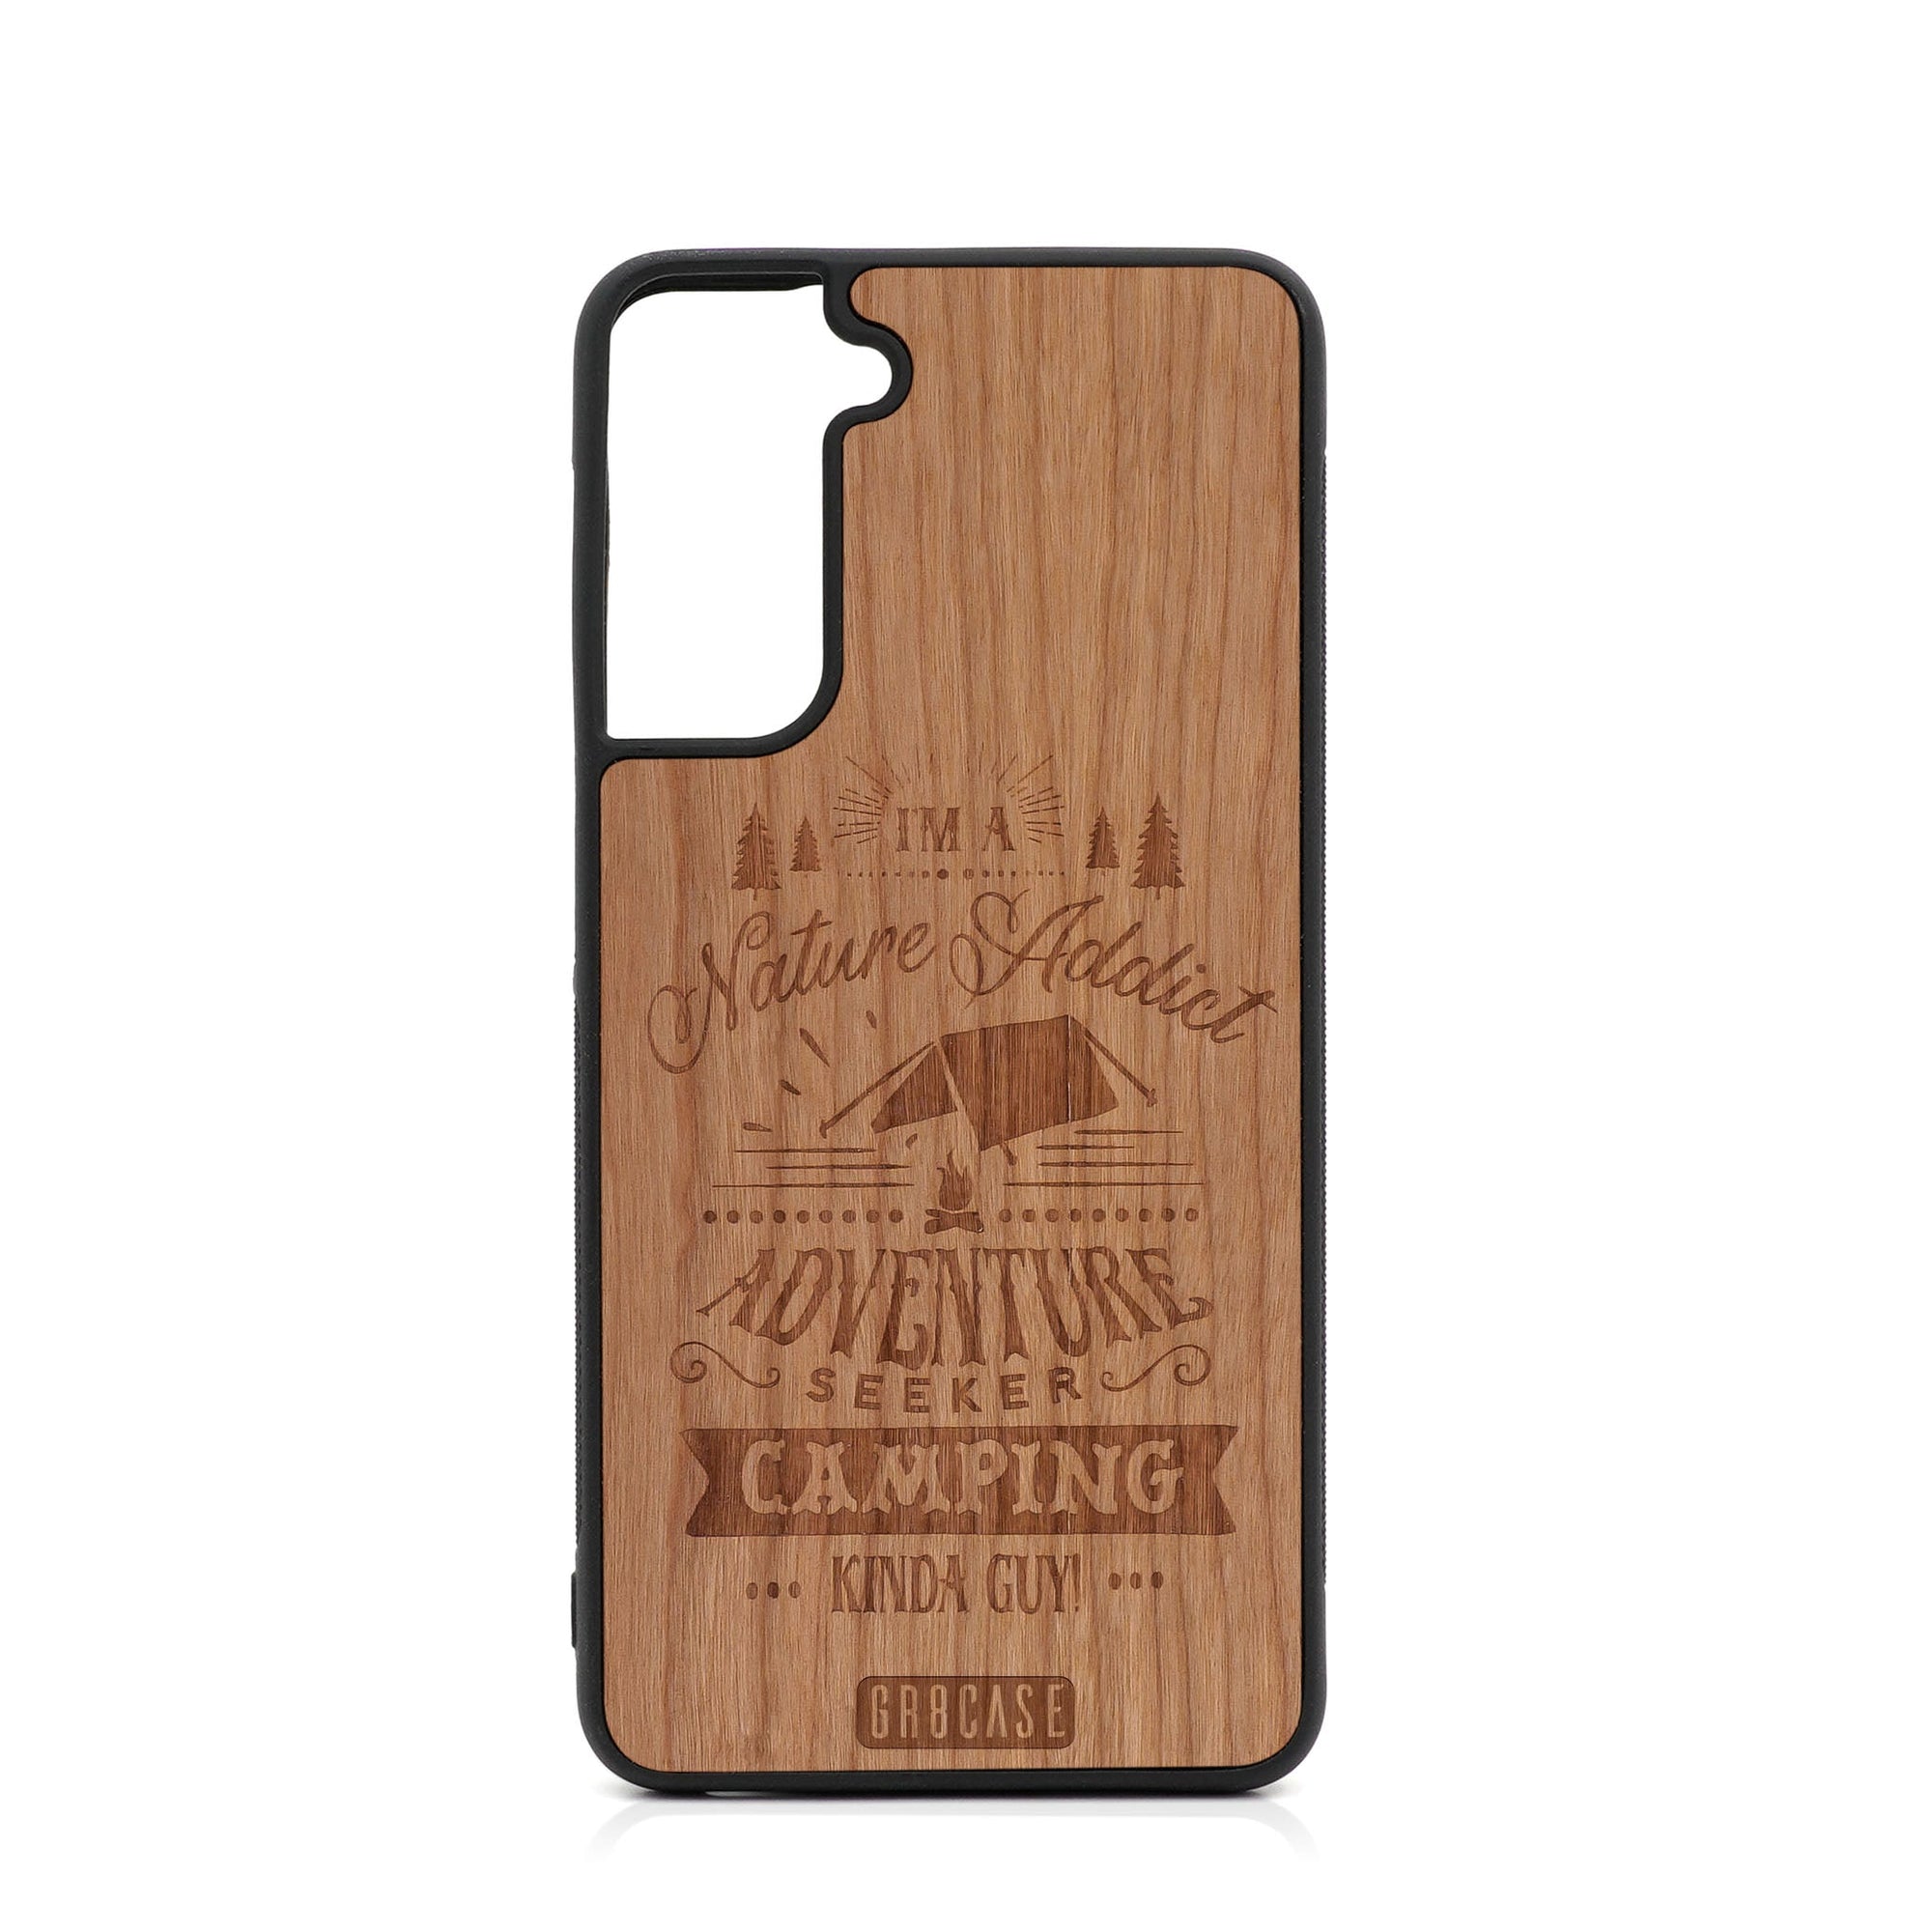 I'm A Nature Addict Adventure Seeker Camping Kinda Guy Design Wood Case For Samsung Galaxy S24 5G